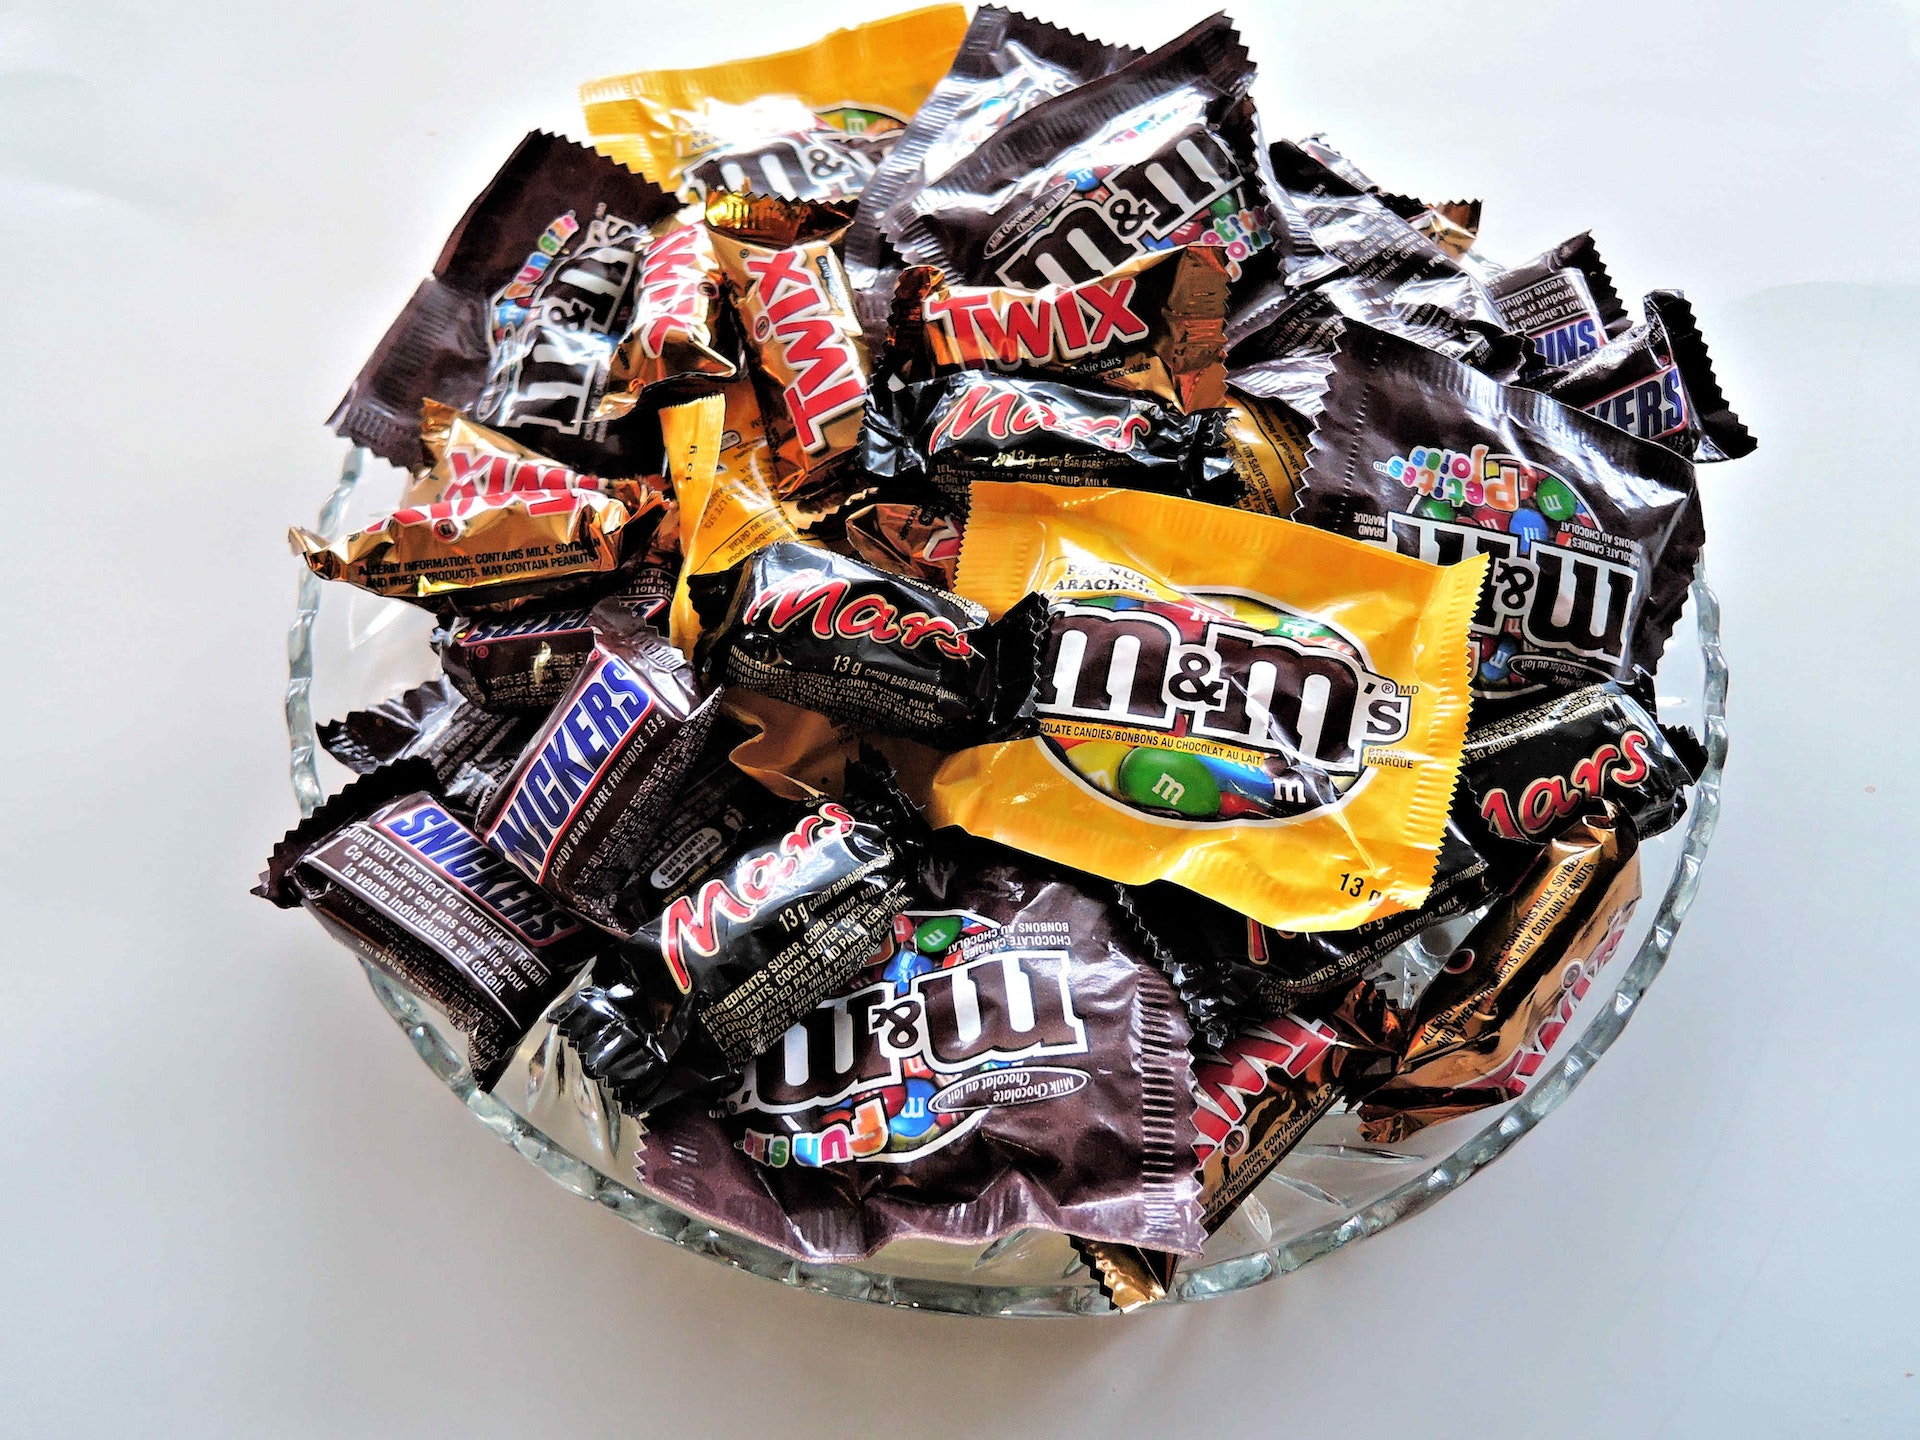 A bowl full of chocolates | Source: Pexels